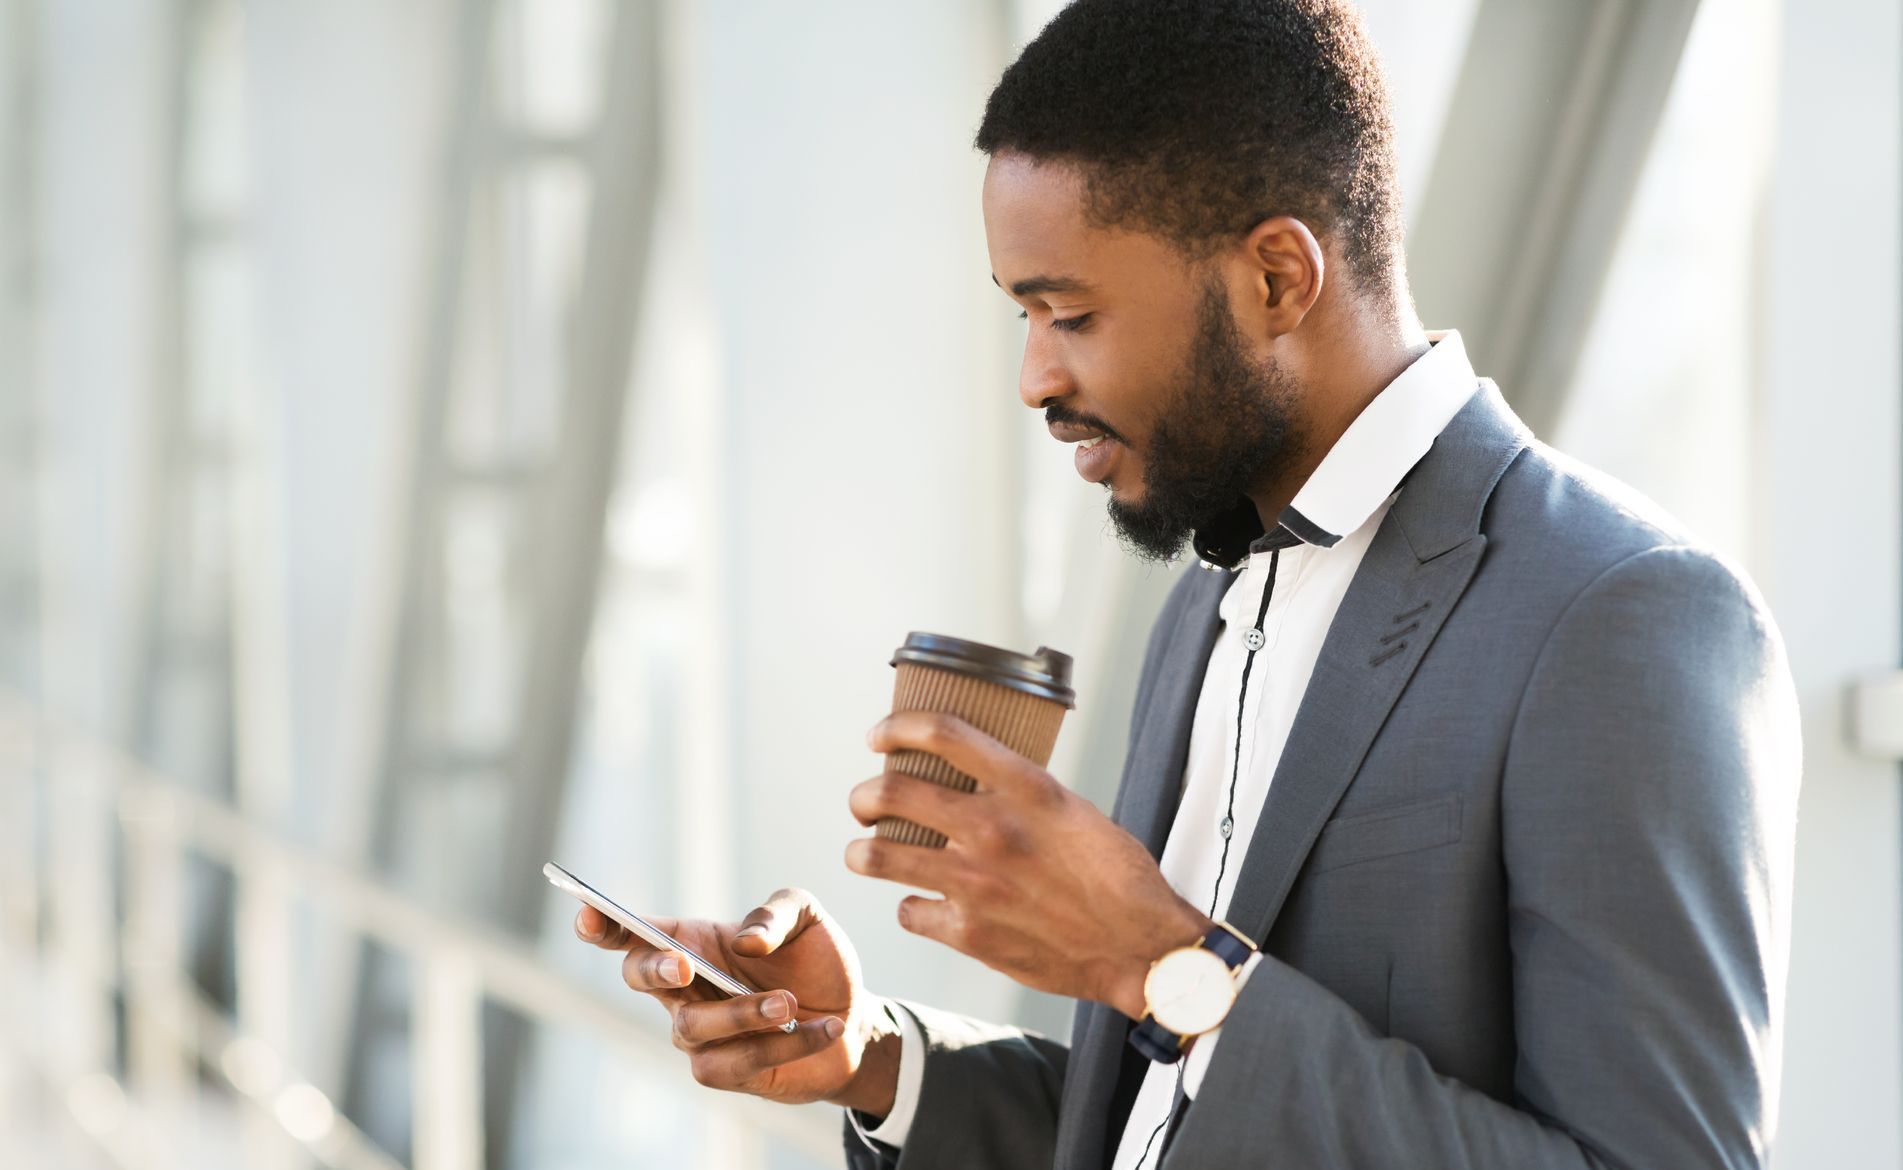 Man in a suit holding a cup of coffee and looking at his cell phone.